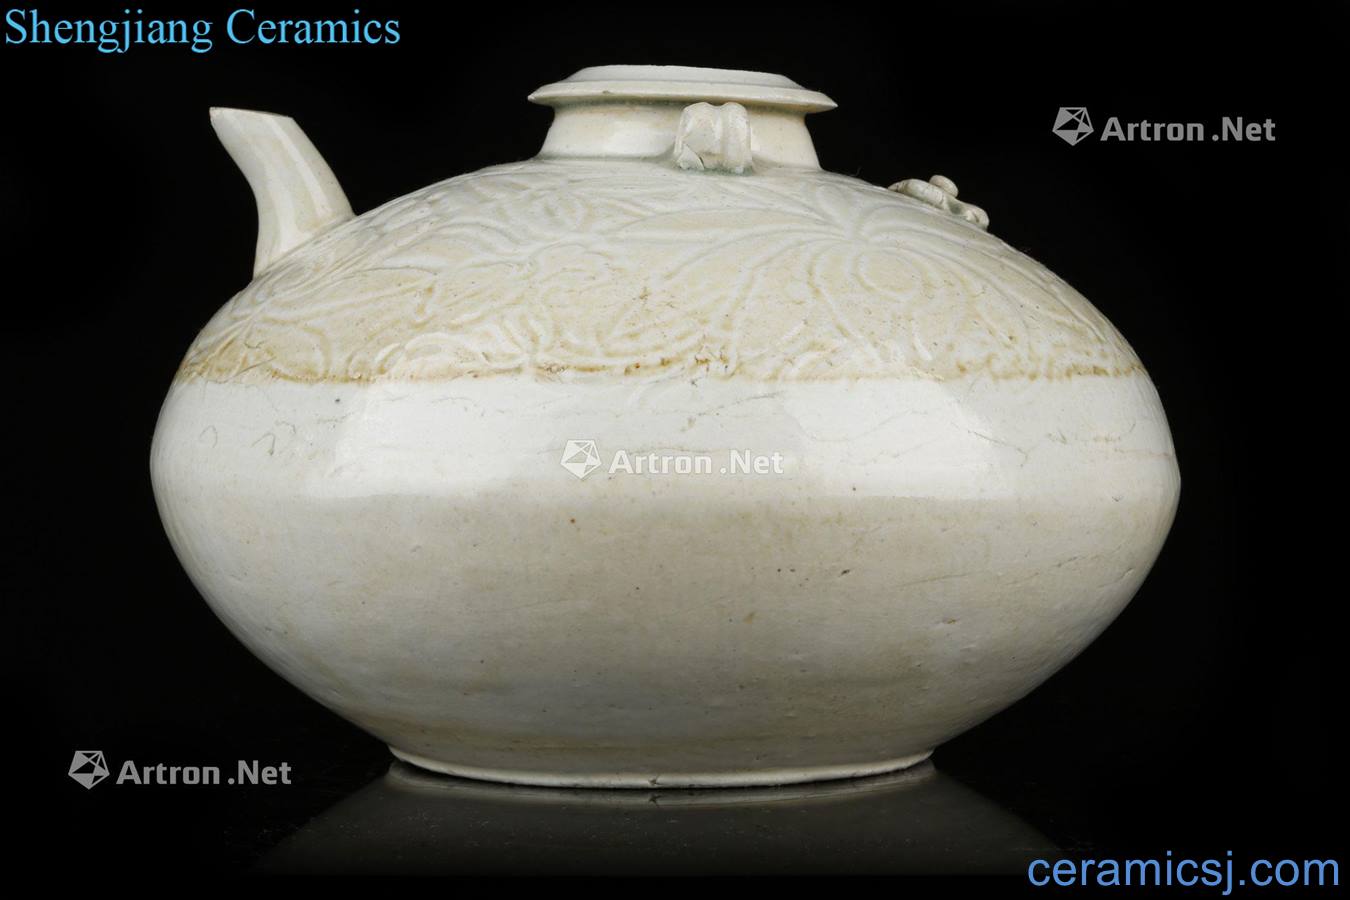 The yuan dynasty or Ming dynasty The lotus pattern white porcelain big kettle